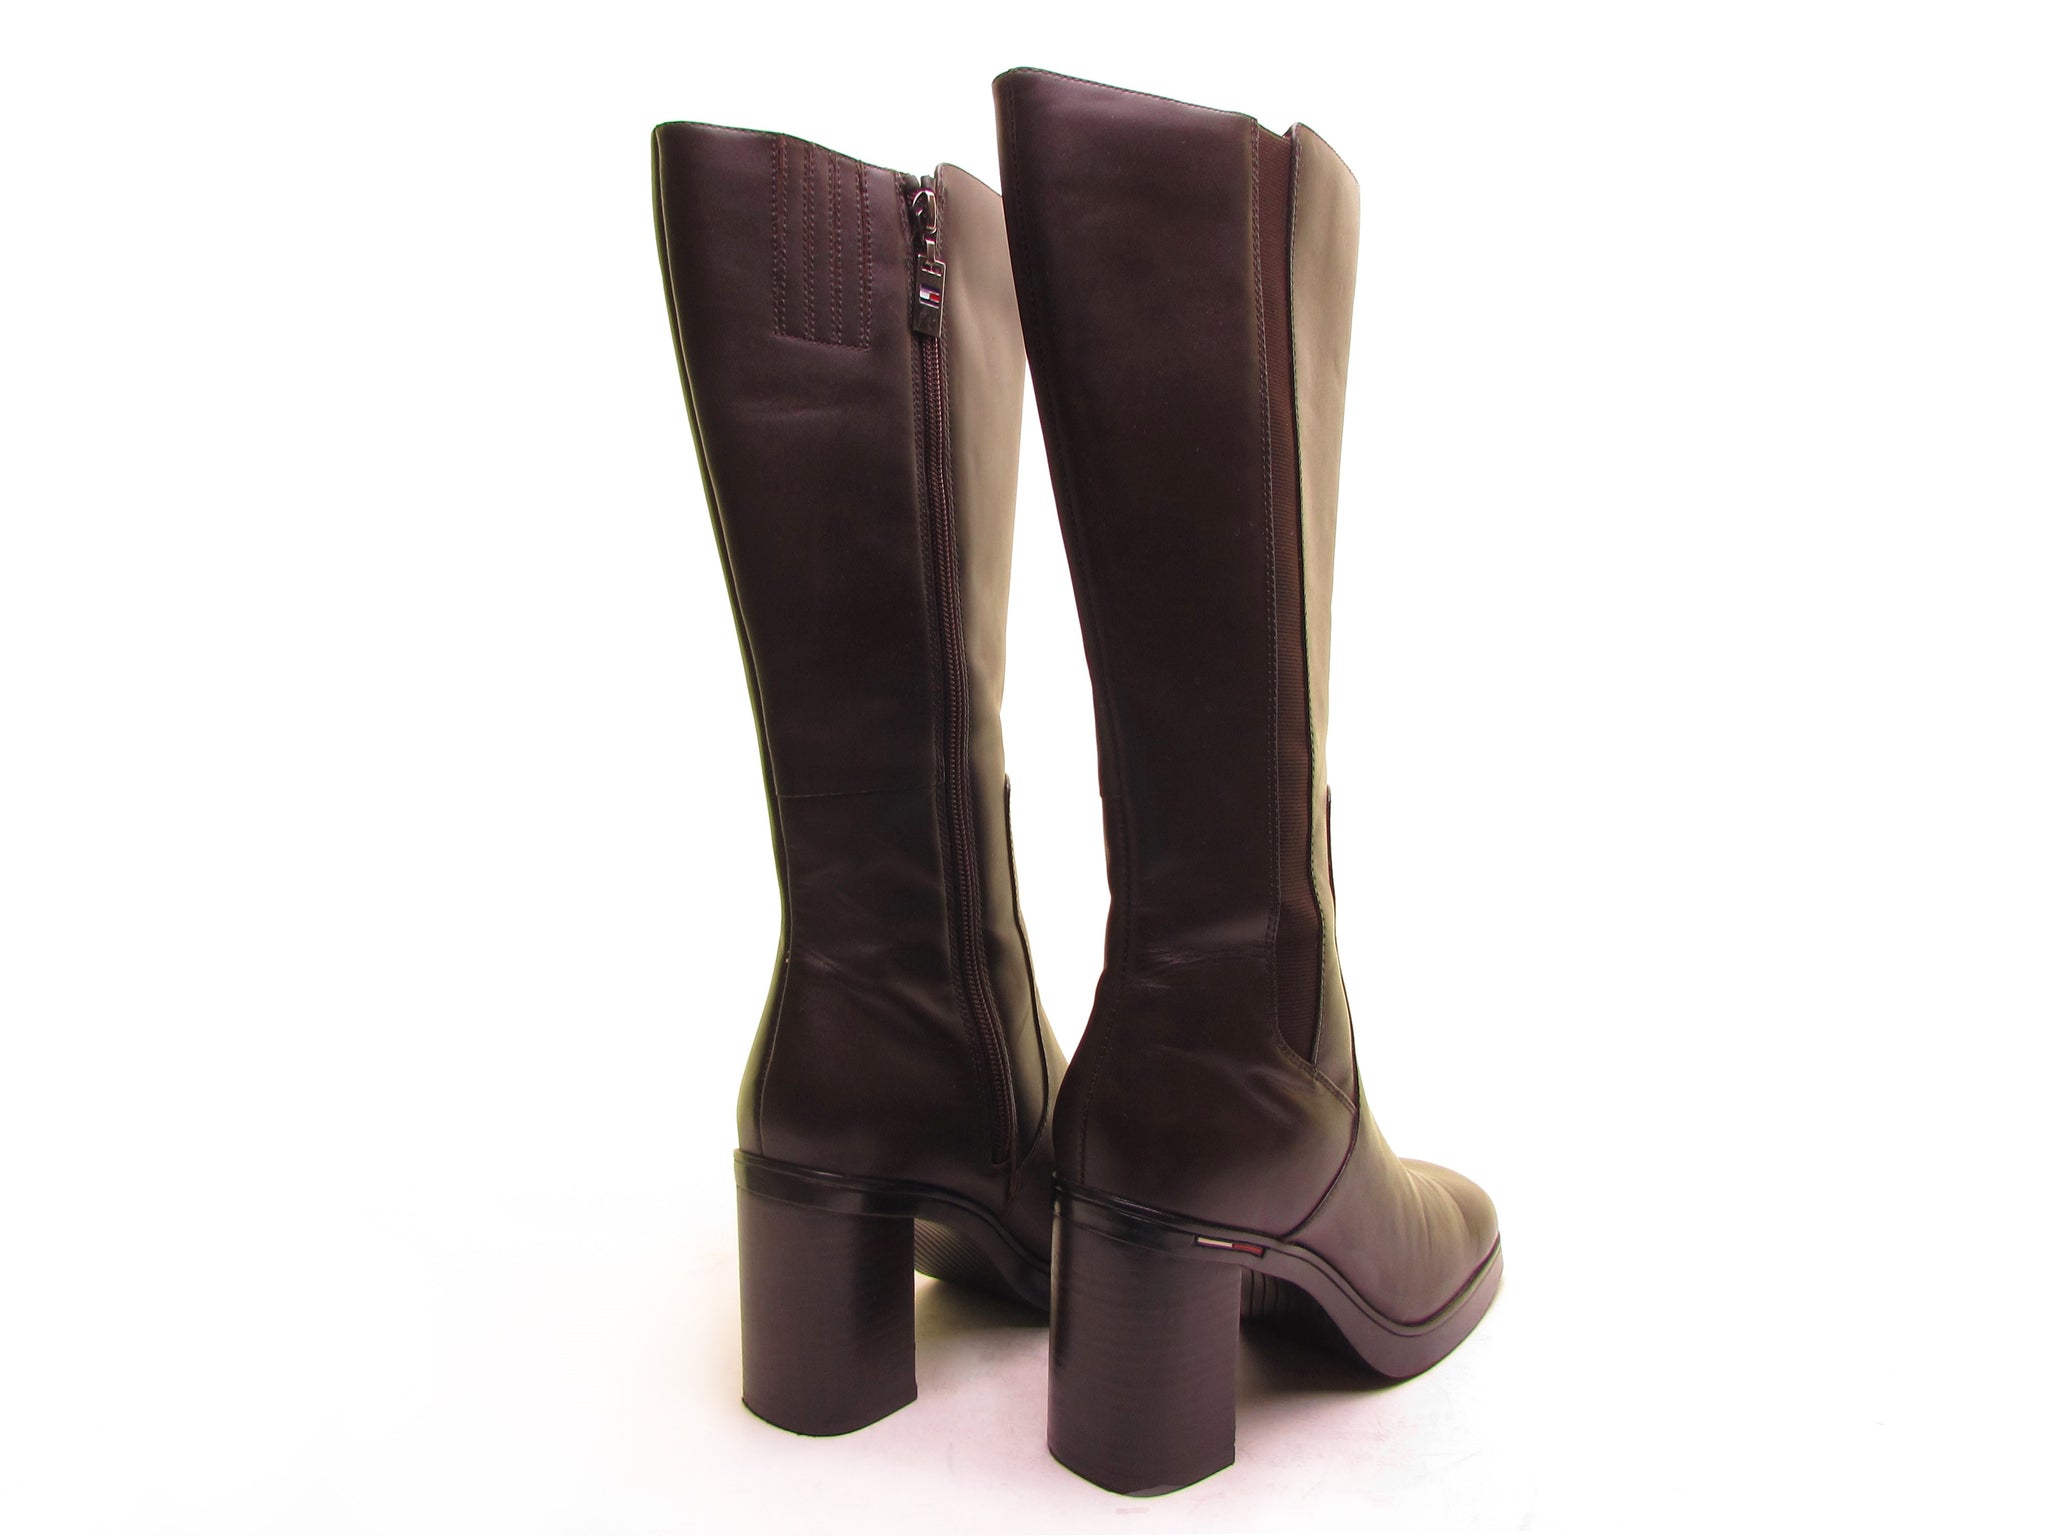 TOMMY HILFIGER platform boots square toe boots chunky heel boot 90s brown leather knee high boots tall indie hipster boot rubber sole Size 6 1/2